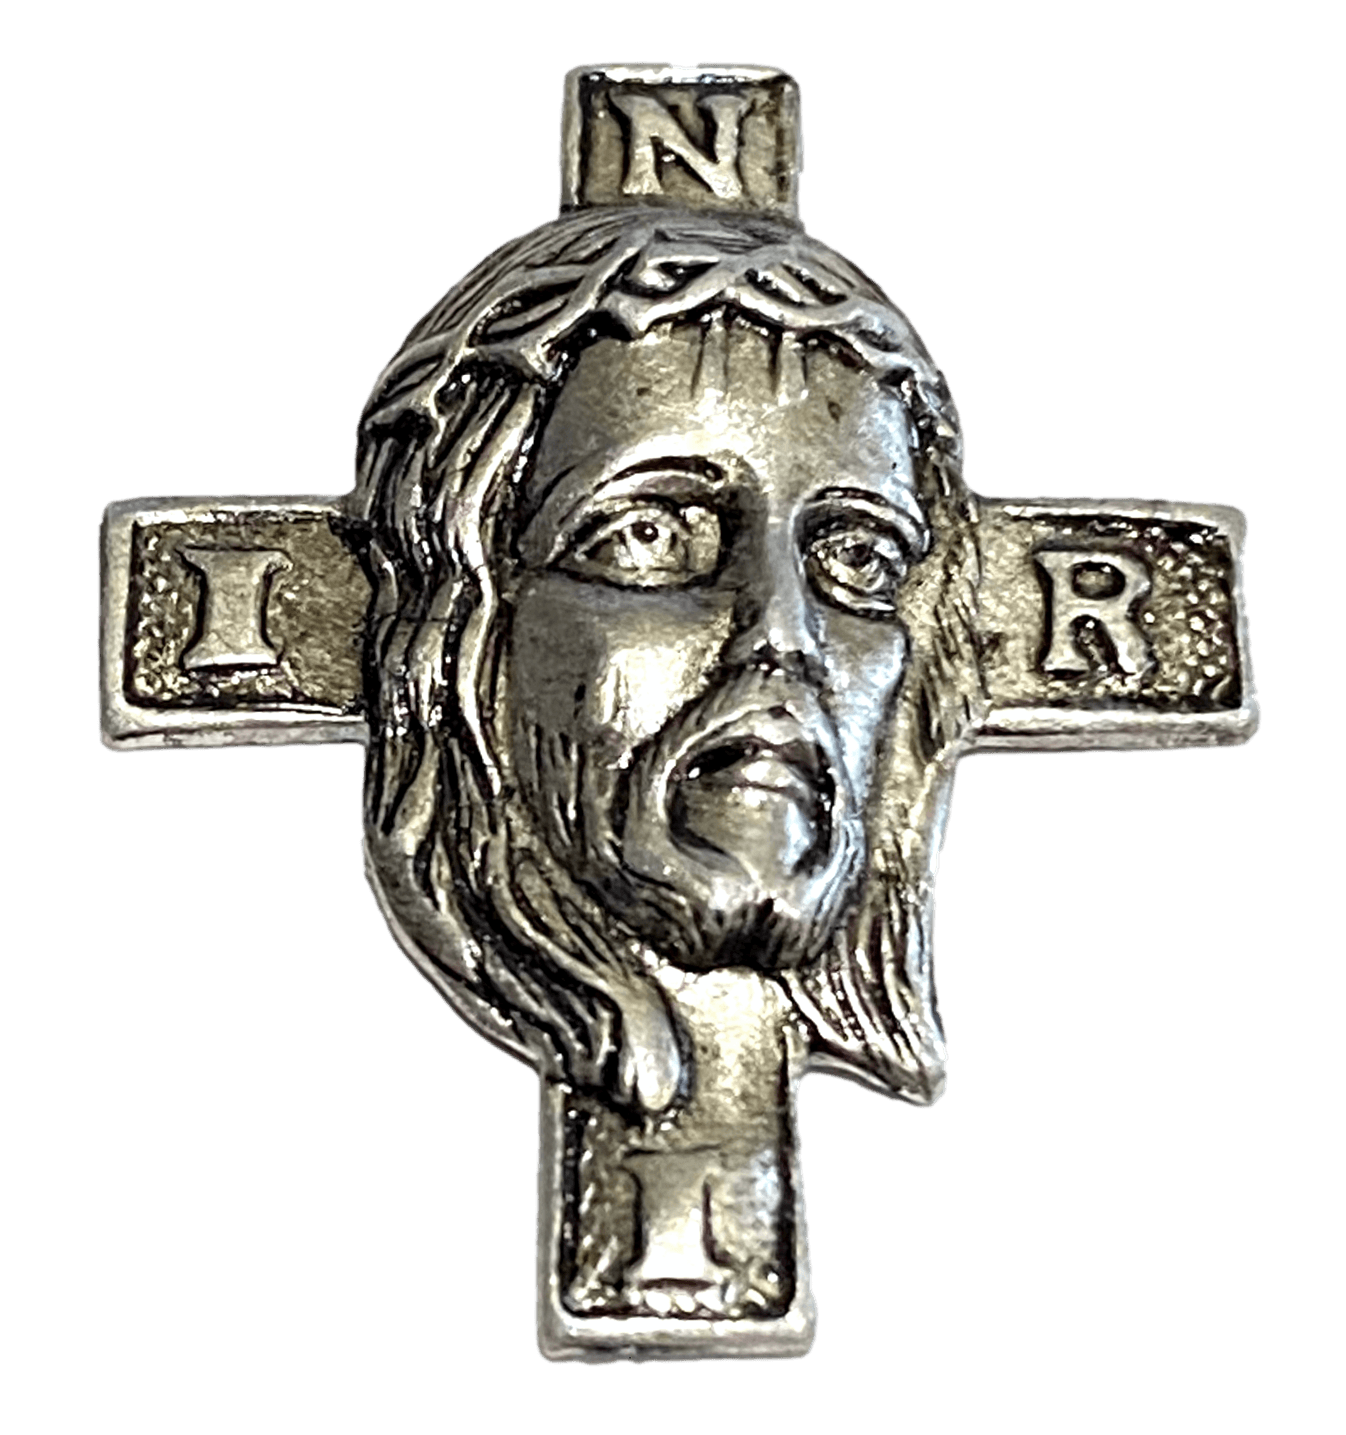 Non-Hanging Sorrowful Jesus INRI Cross Italy 1 1/8 L x 1 W inches - Ysleta Mission Gift Shop- VOTED El Paso's Best Gift Shop